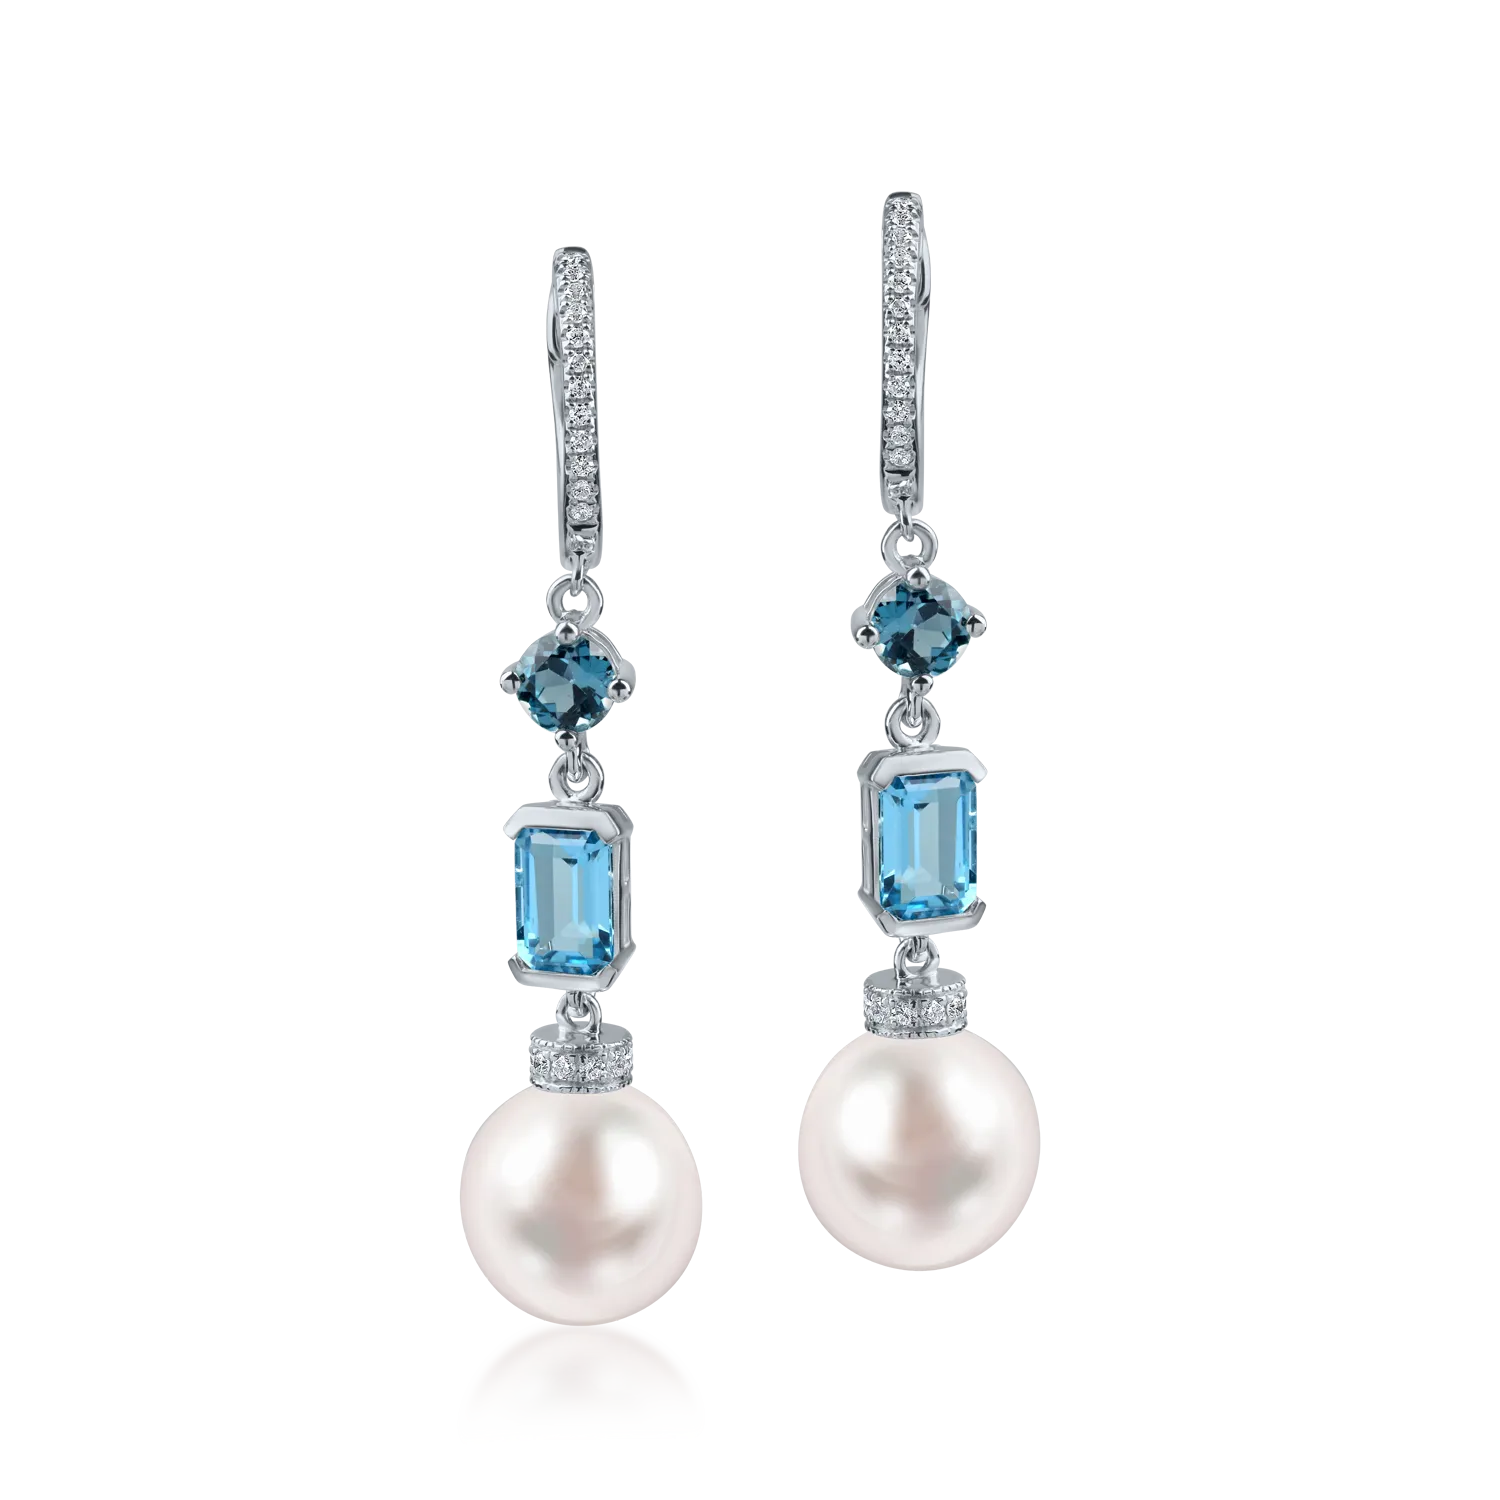 White gold earrings with 16.8ct precious and semi-precious stones